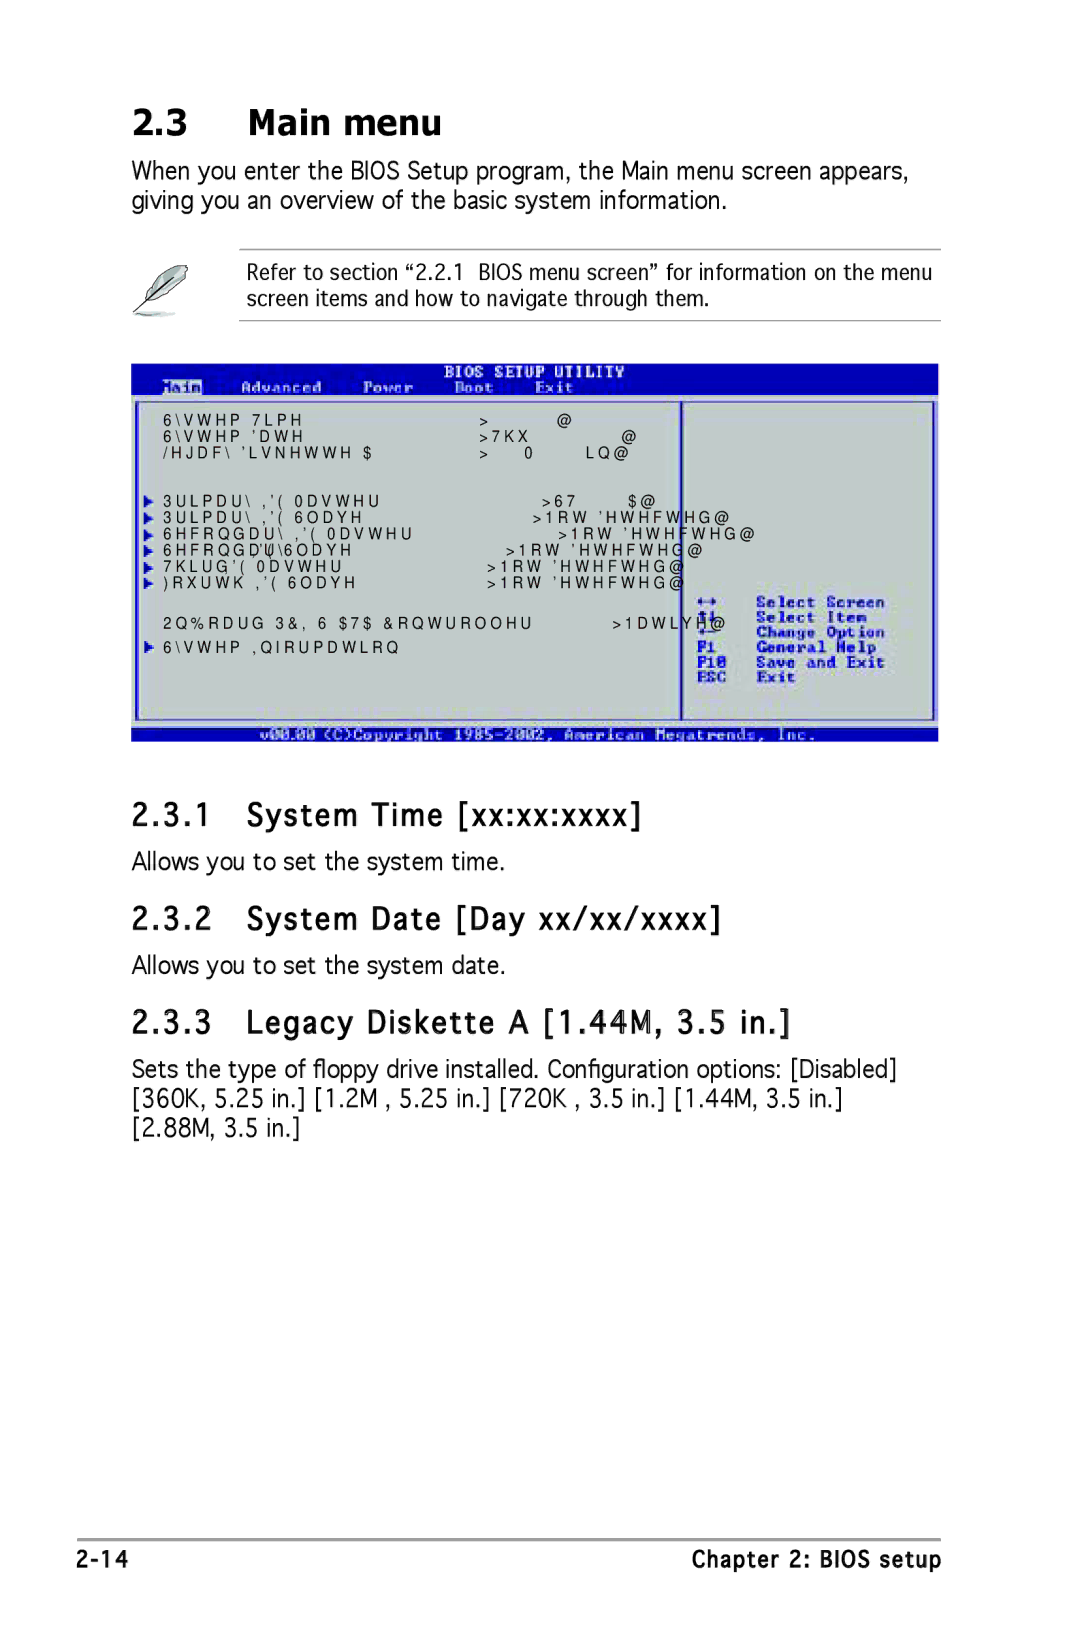 Asus P5SD2-X SE manual Main menu, System Time, System Date Day xx/xx/xxxx, Legacy Diskette a 1 .44M, 3.5 